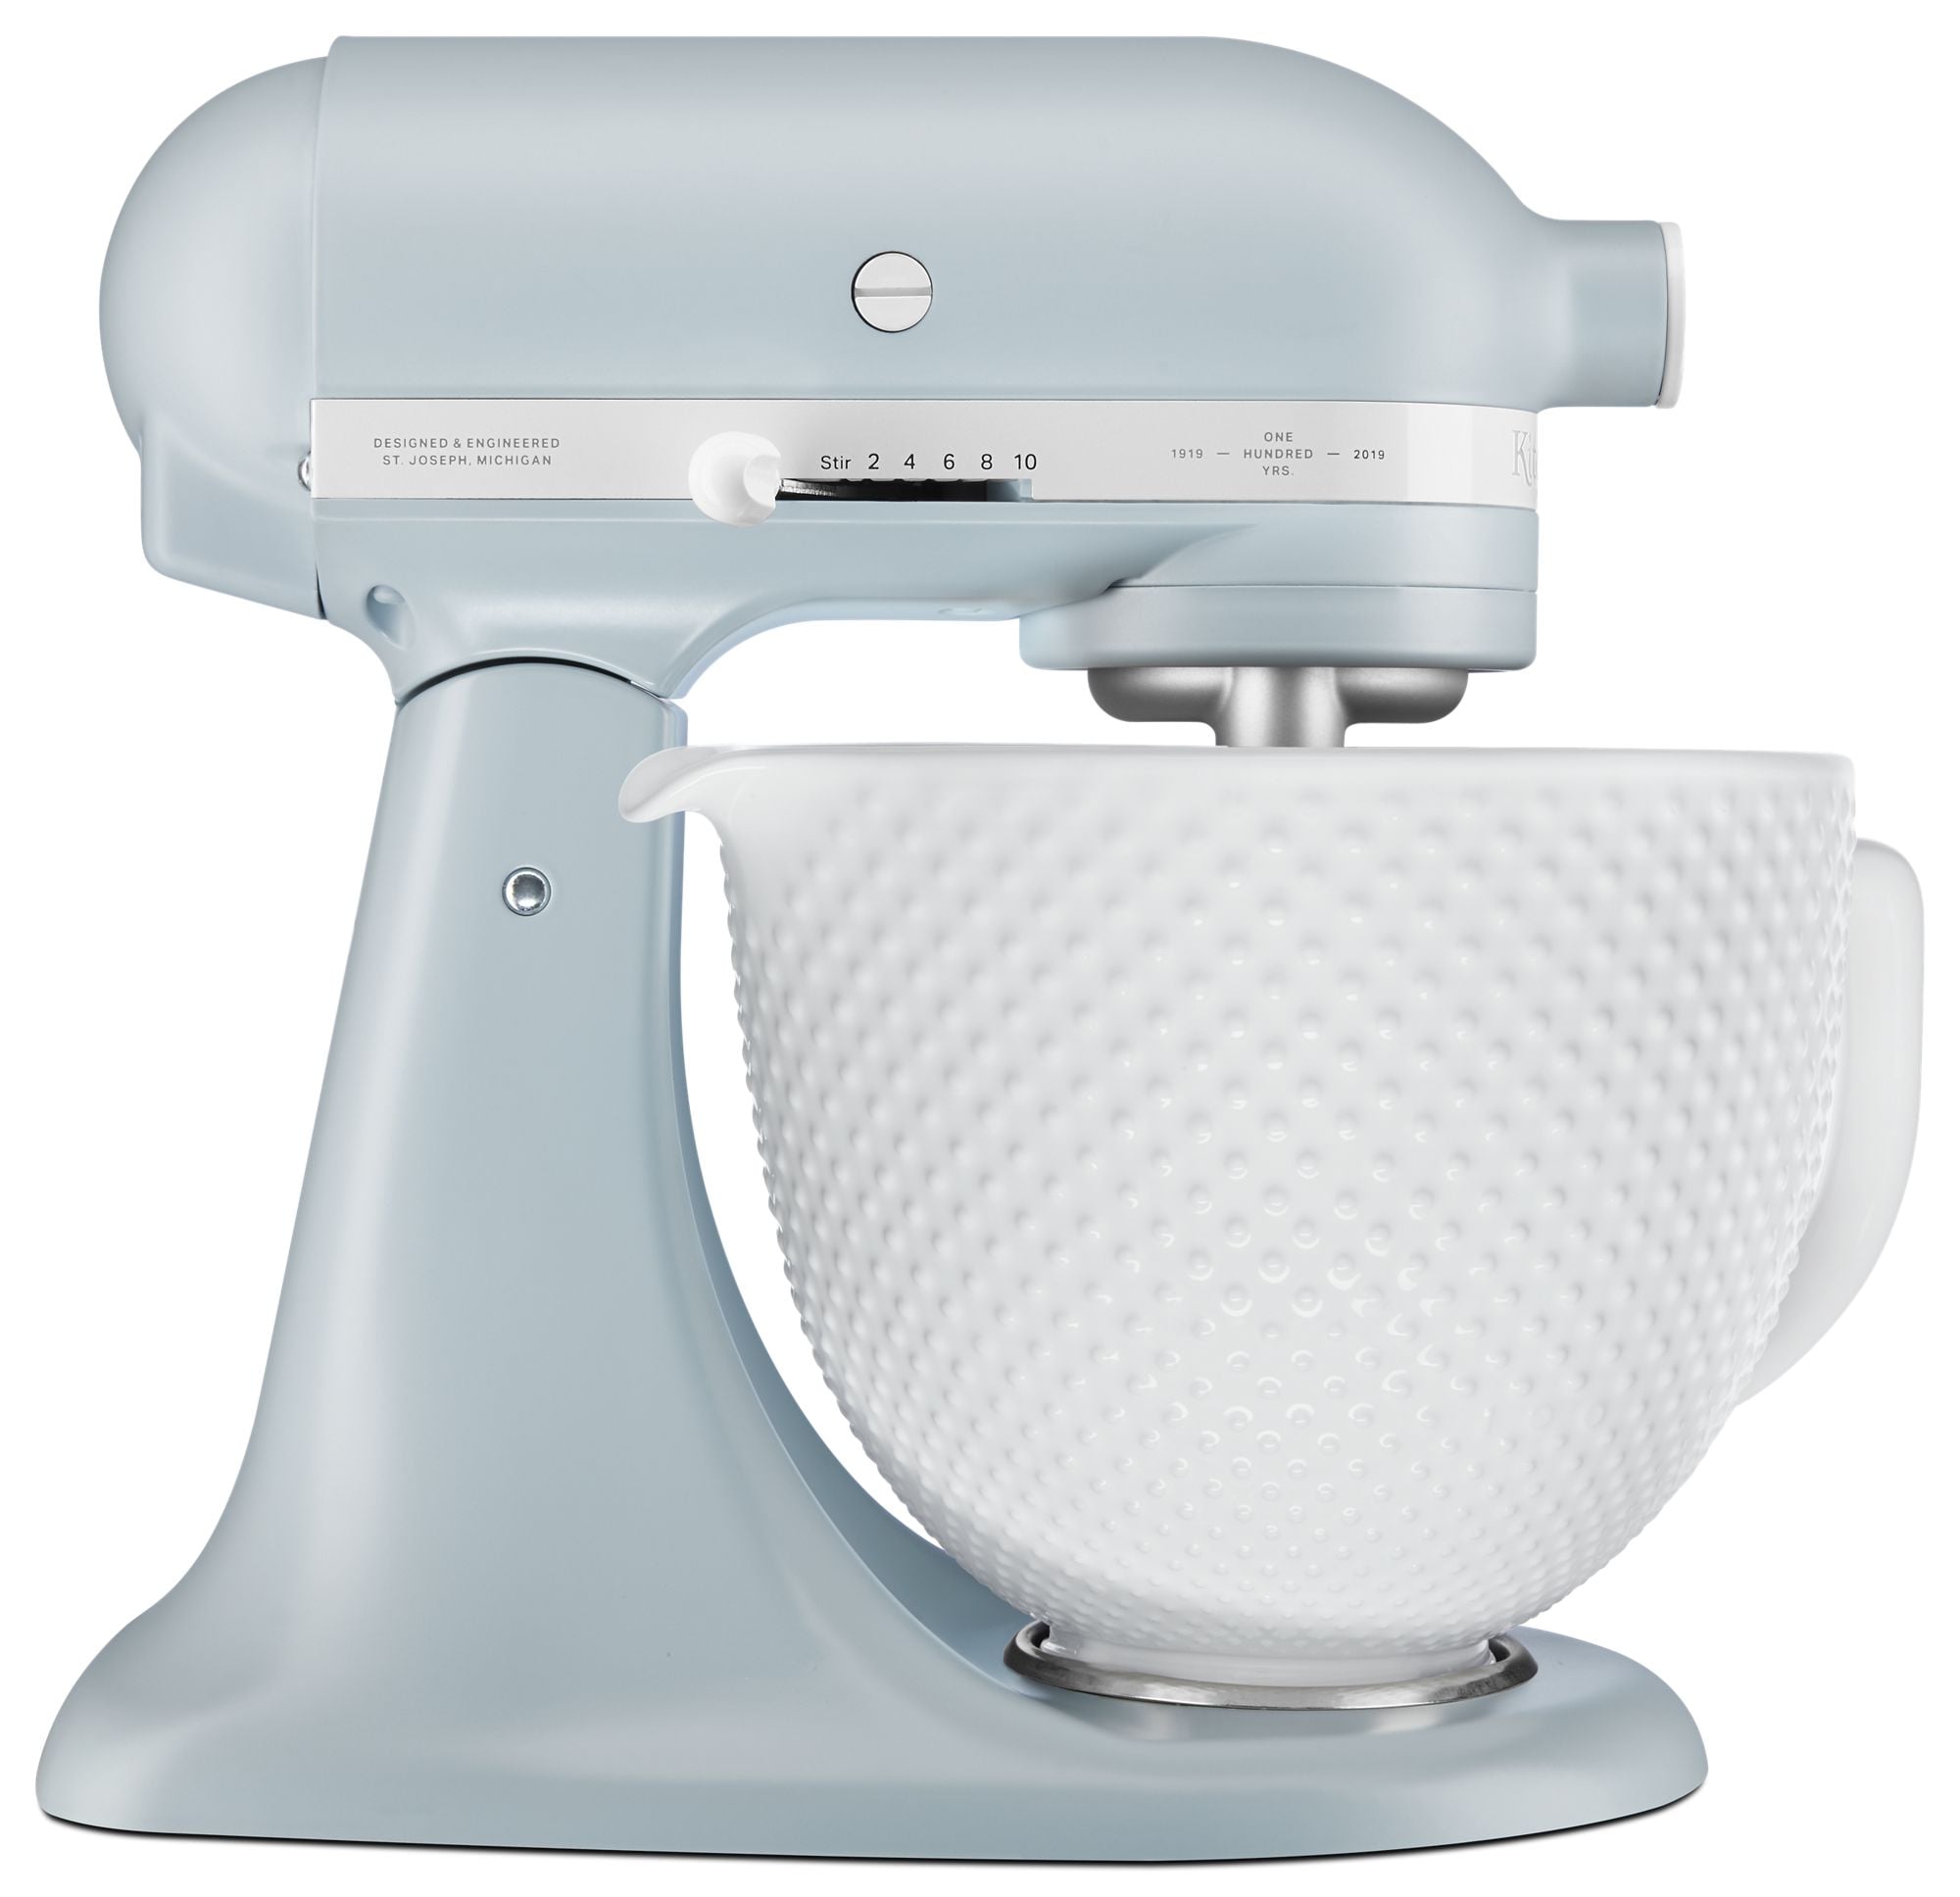 s Selling KitchenAid's Chic 100th Anniversary Mixer for $100 Off